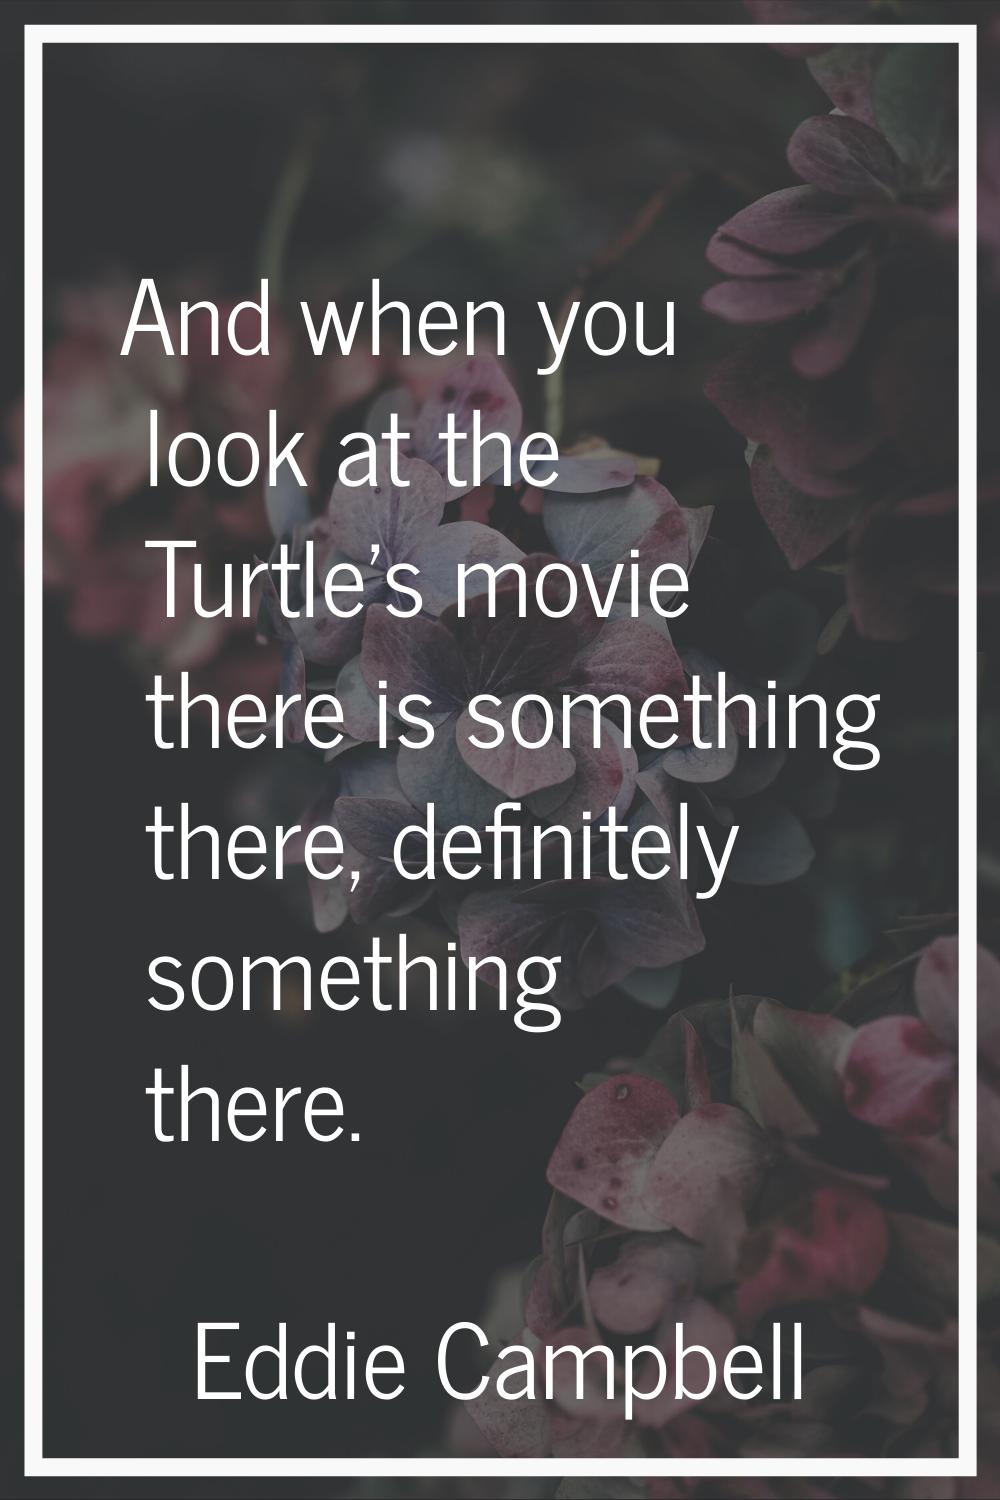 And when you look at the Turtle's movie there is something there, definitely something there.